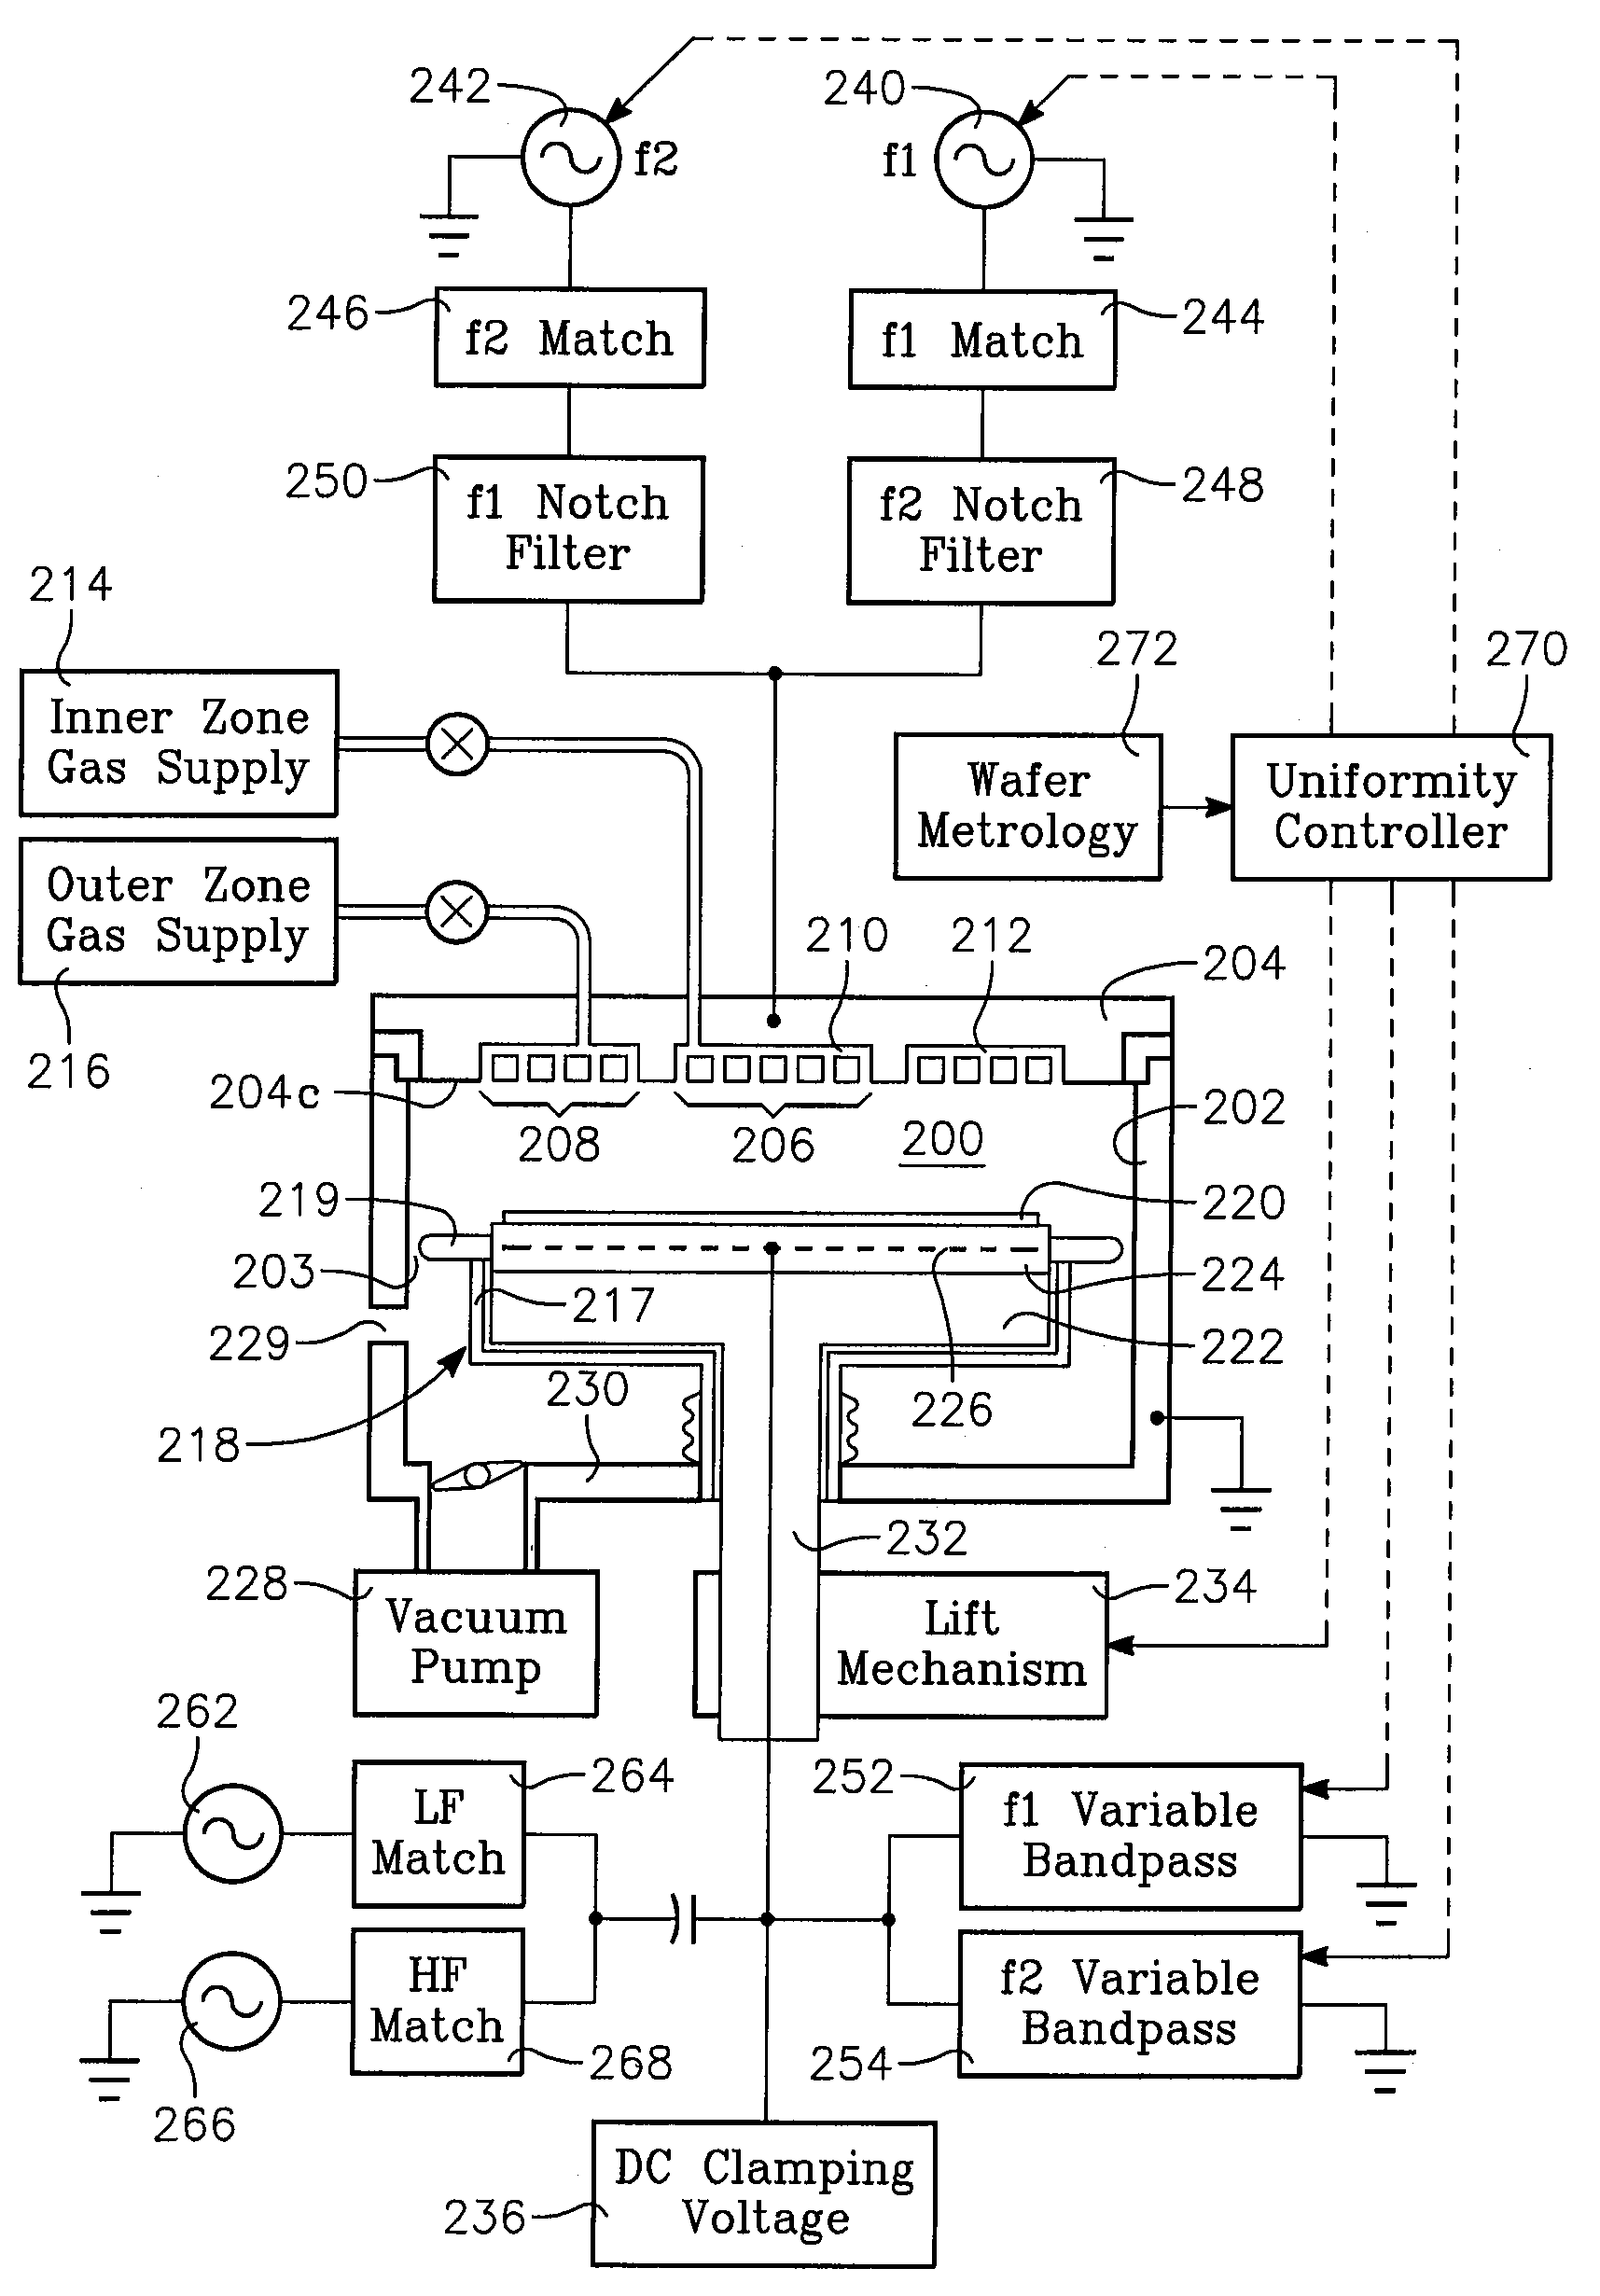 Plasma reactor with wide  process window employing plural vhf sources